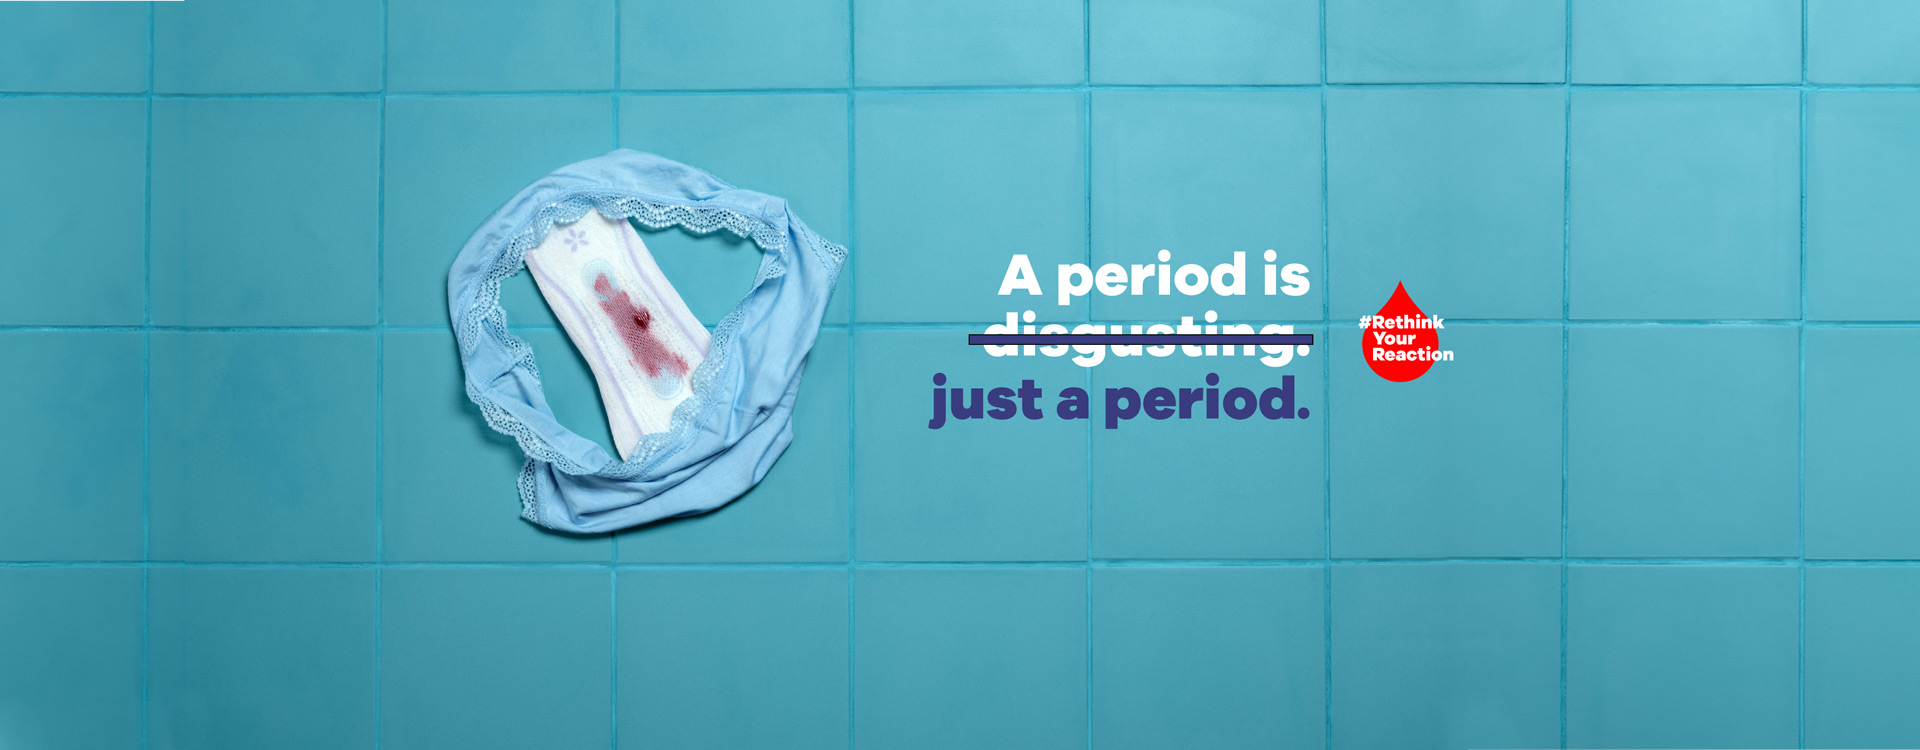 How Long Does a Period Last?